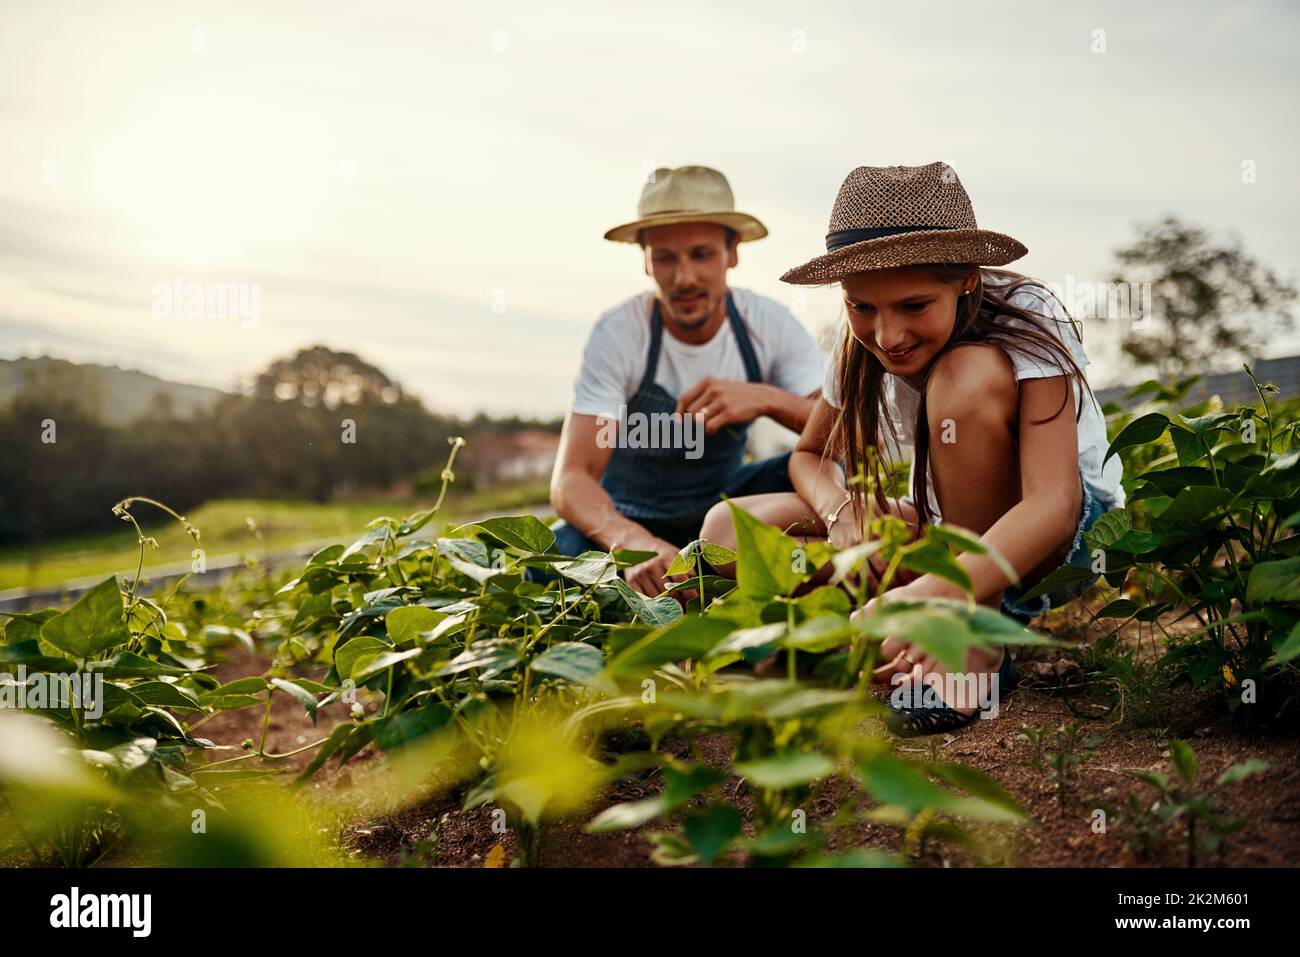 Shes getting some hands on education. Low angle shot of a handsome man and his young daughter working the fields on their farm. Stock Photo